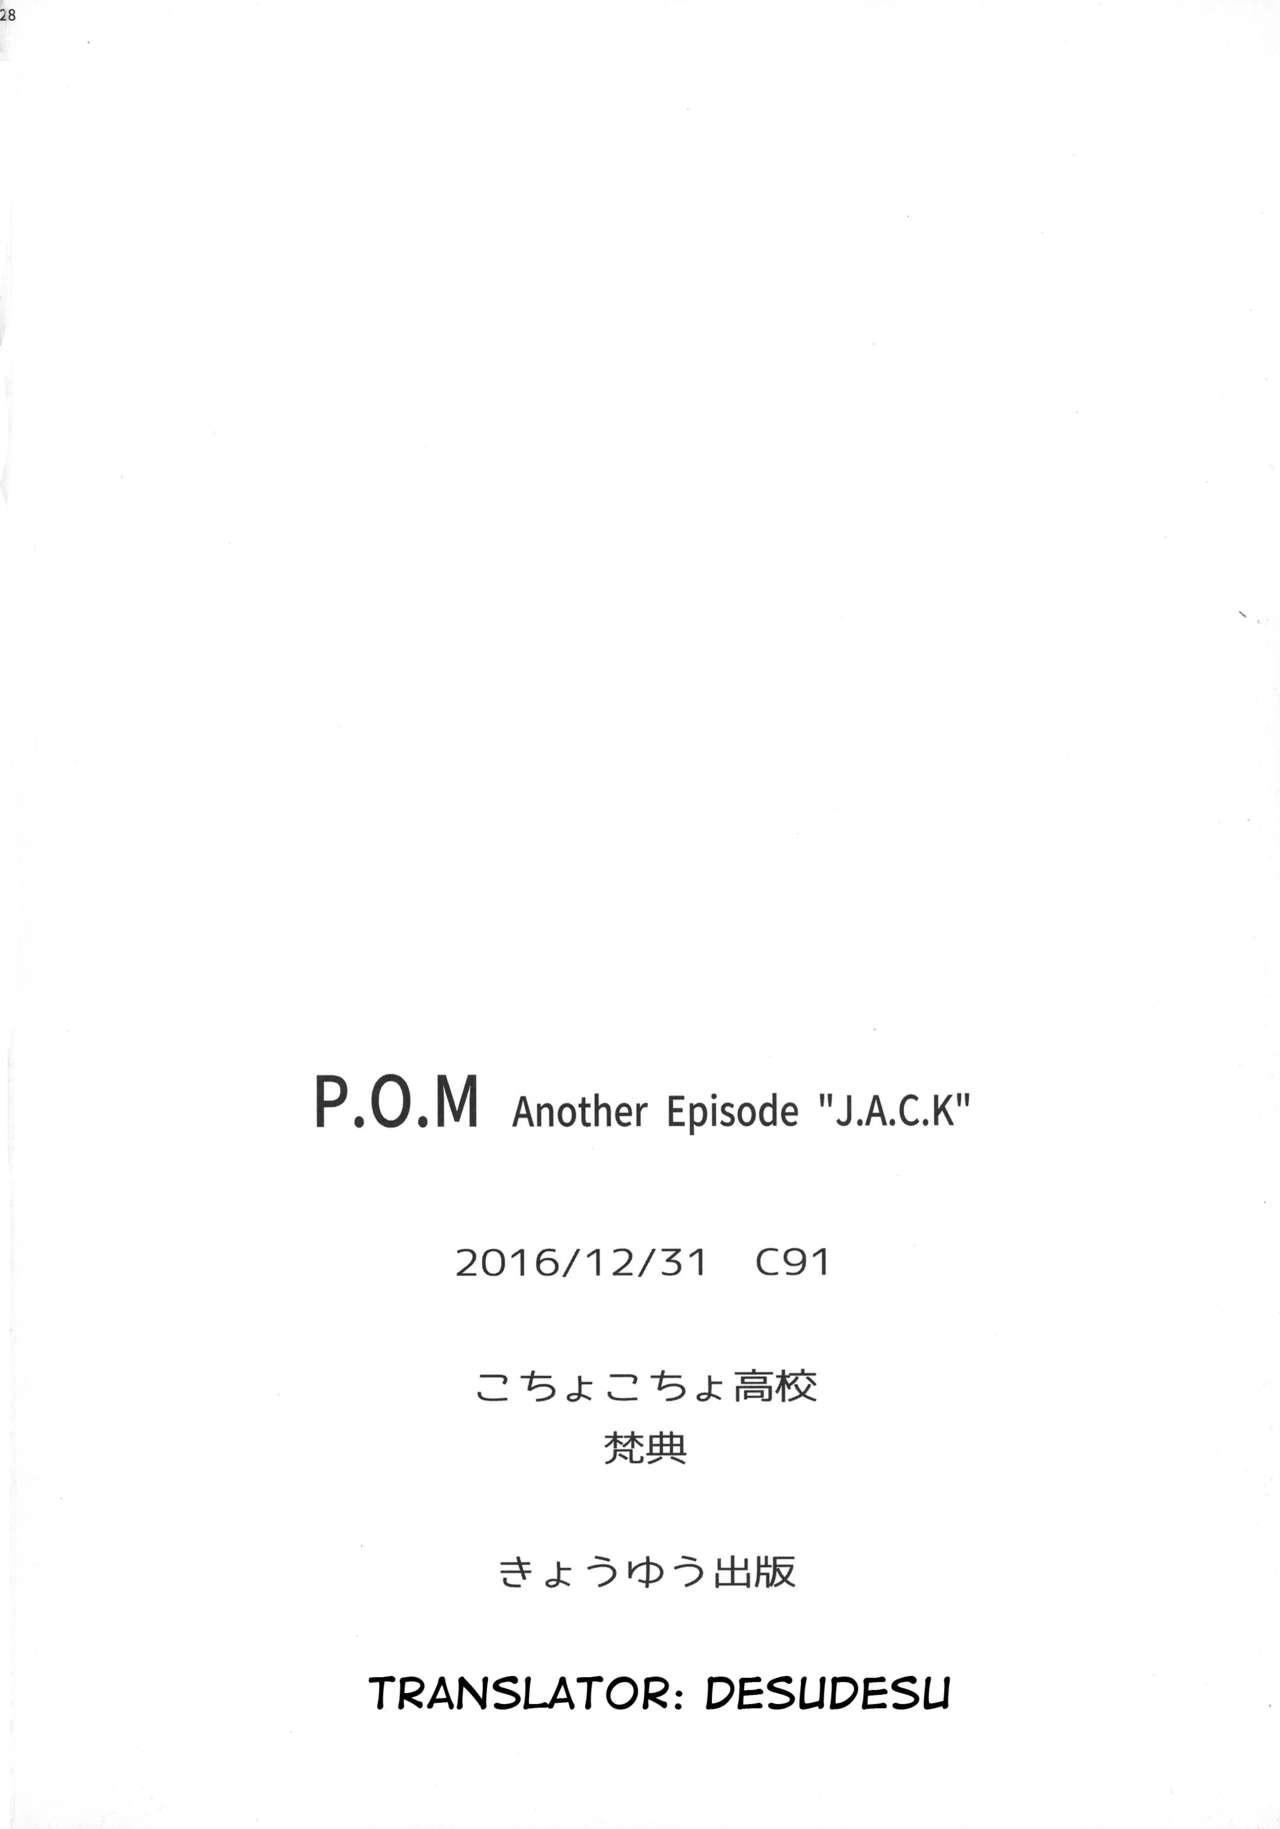 P.O.M Another Episode "J.A.C.K" 29